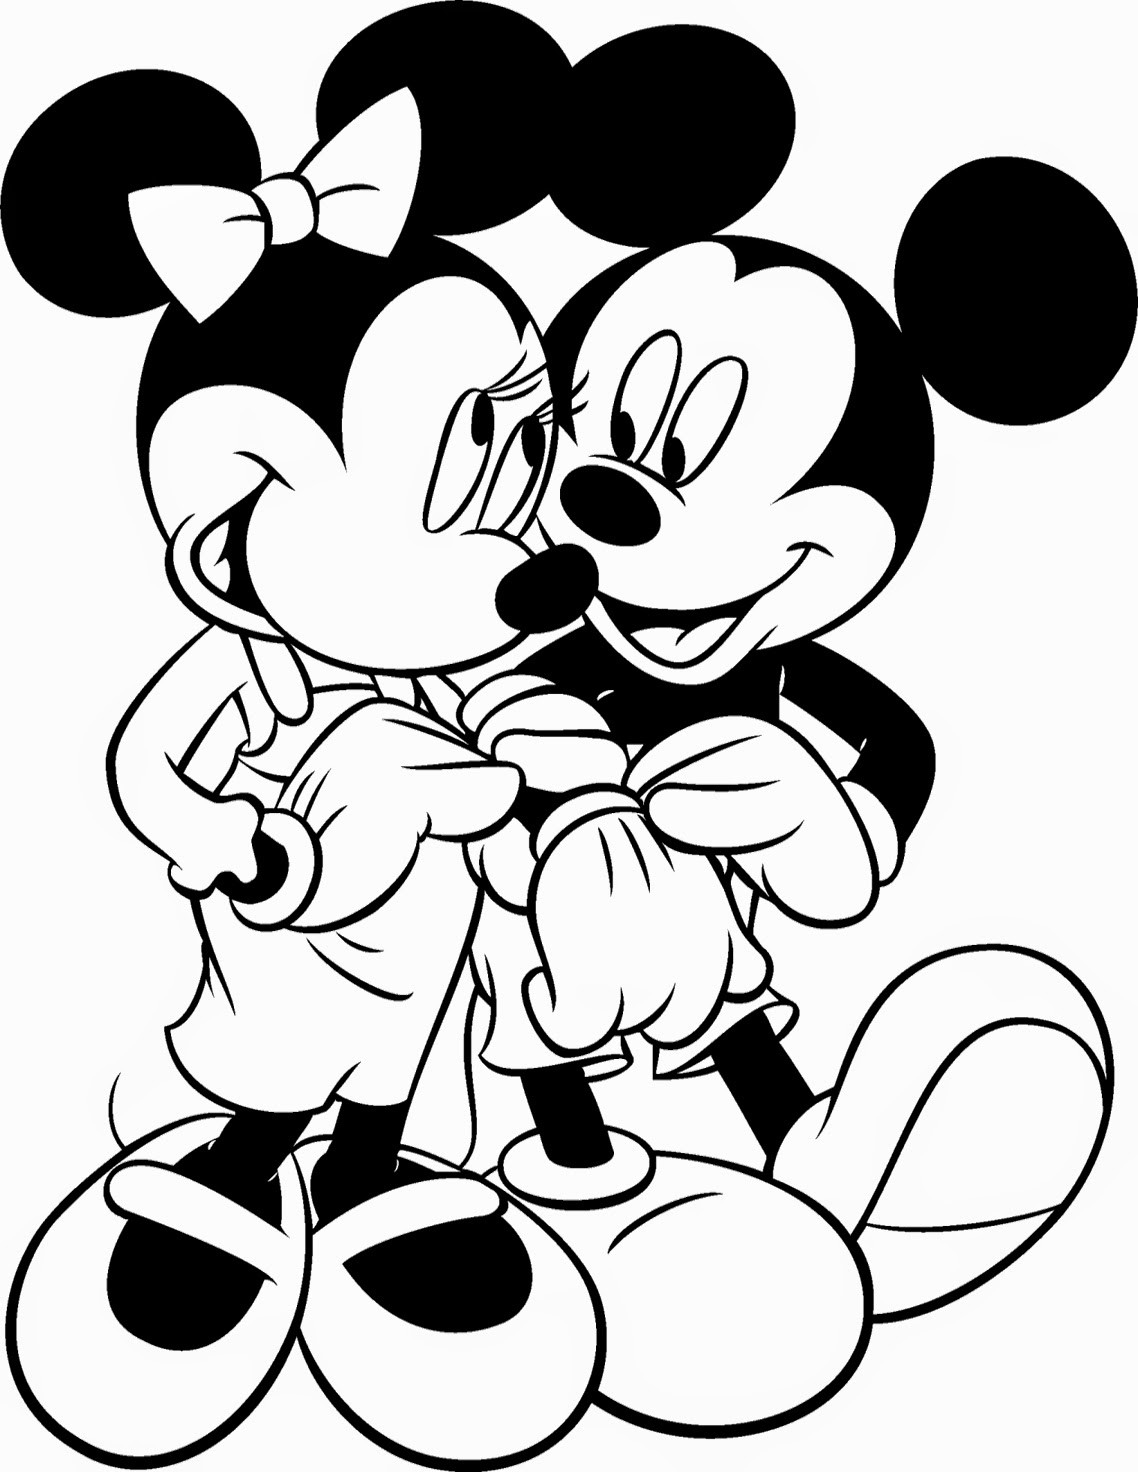 Mini Mouse Coloring Pages
 Coloring Pages Minnie Mouse Coloring Pages Free and Printable